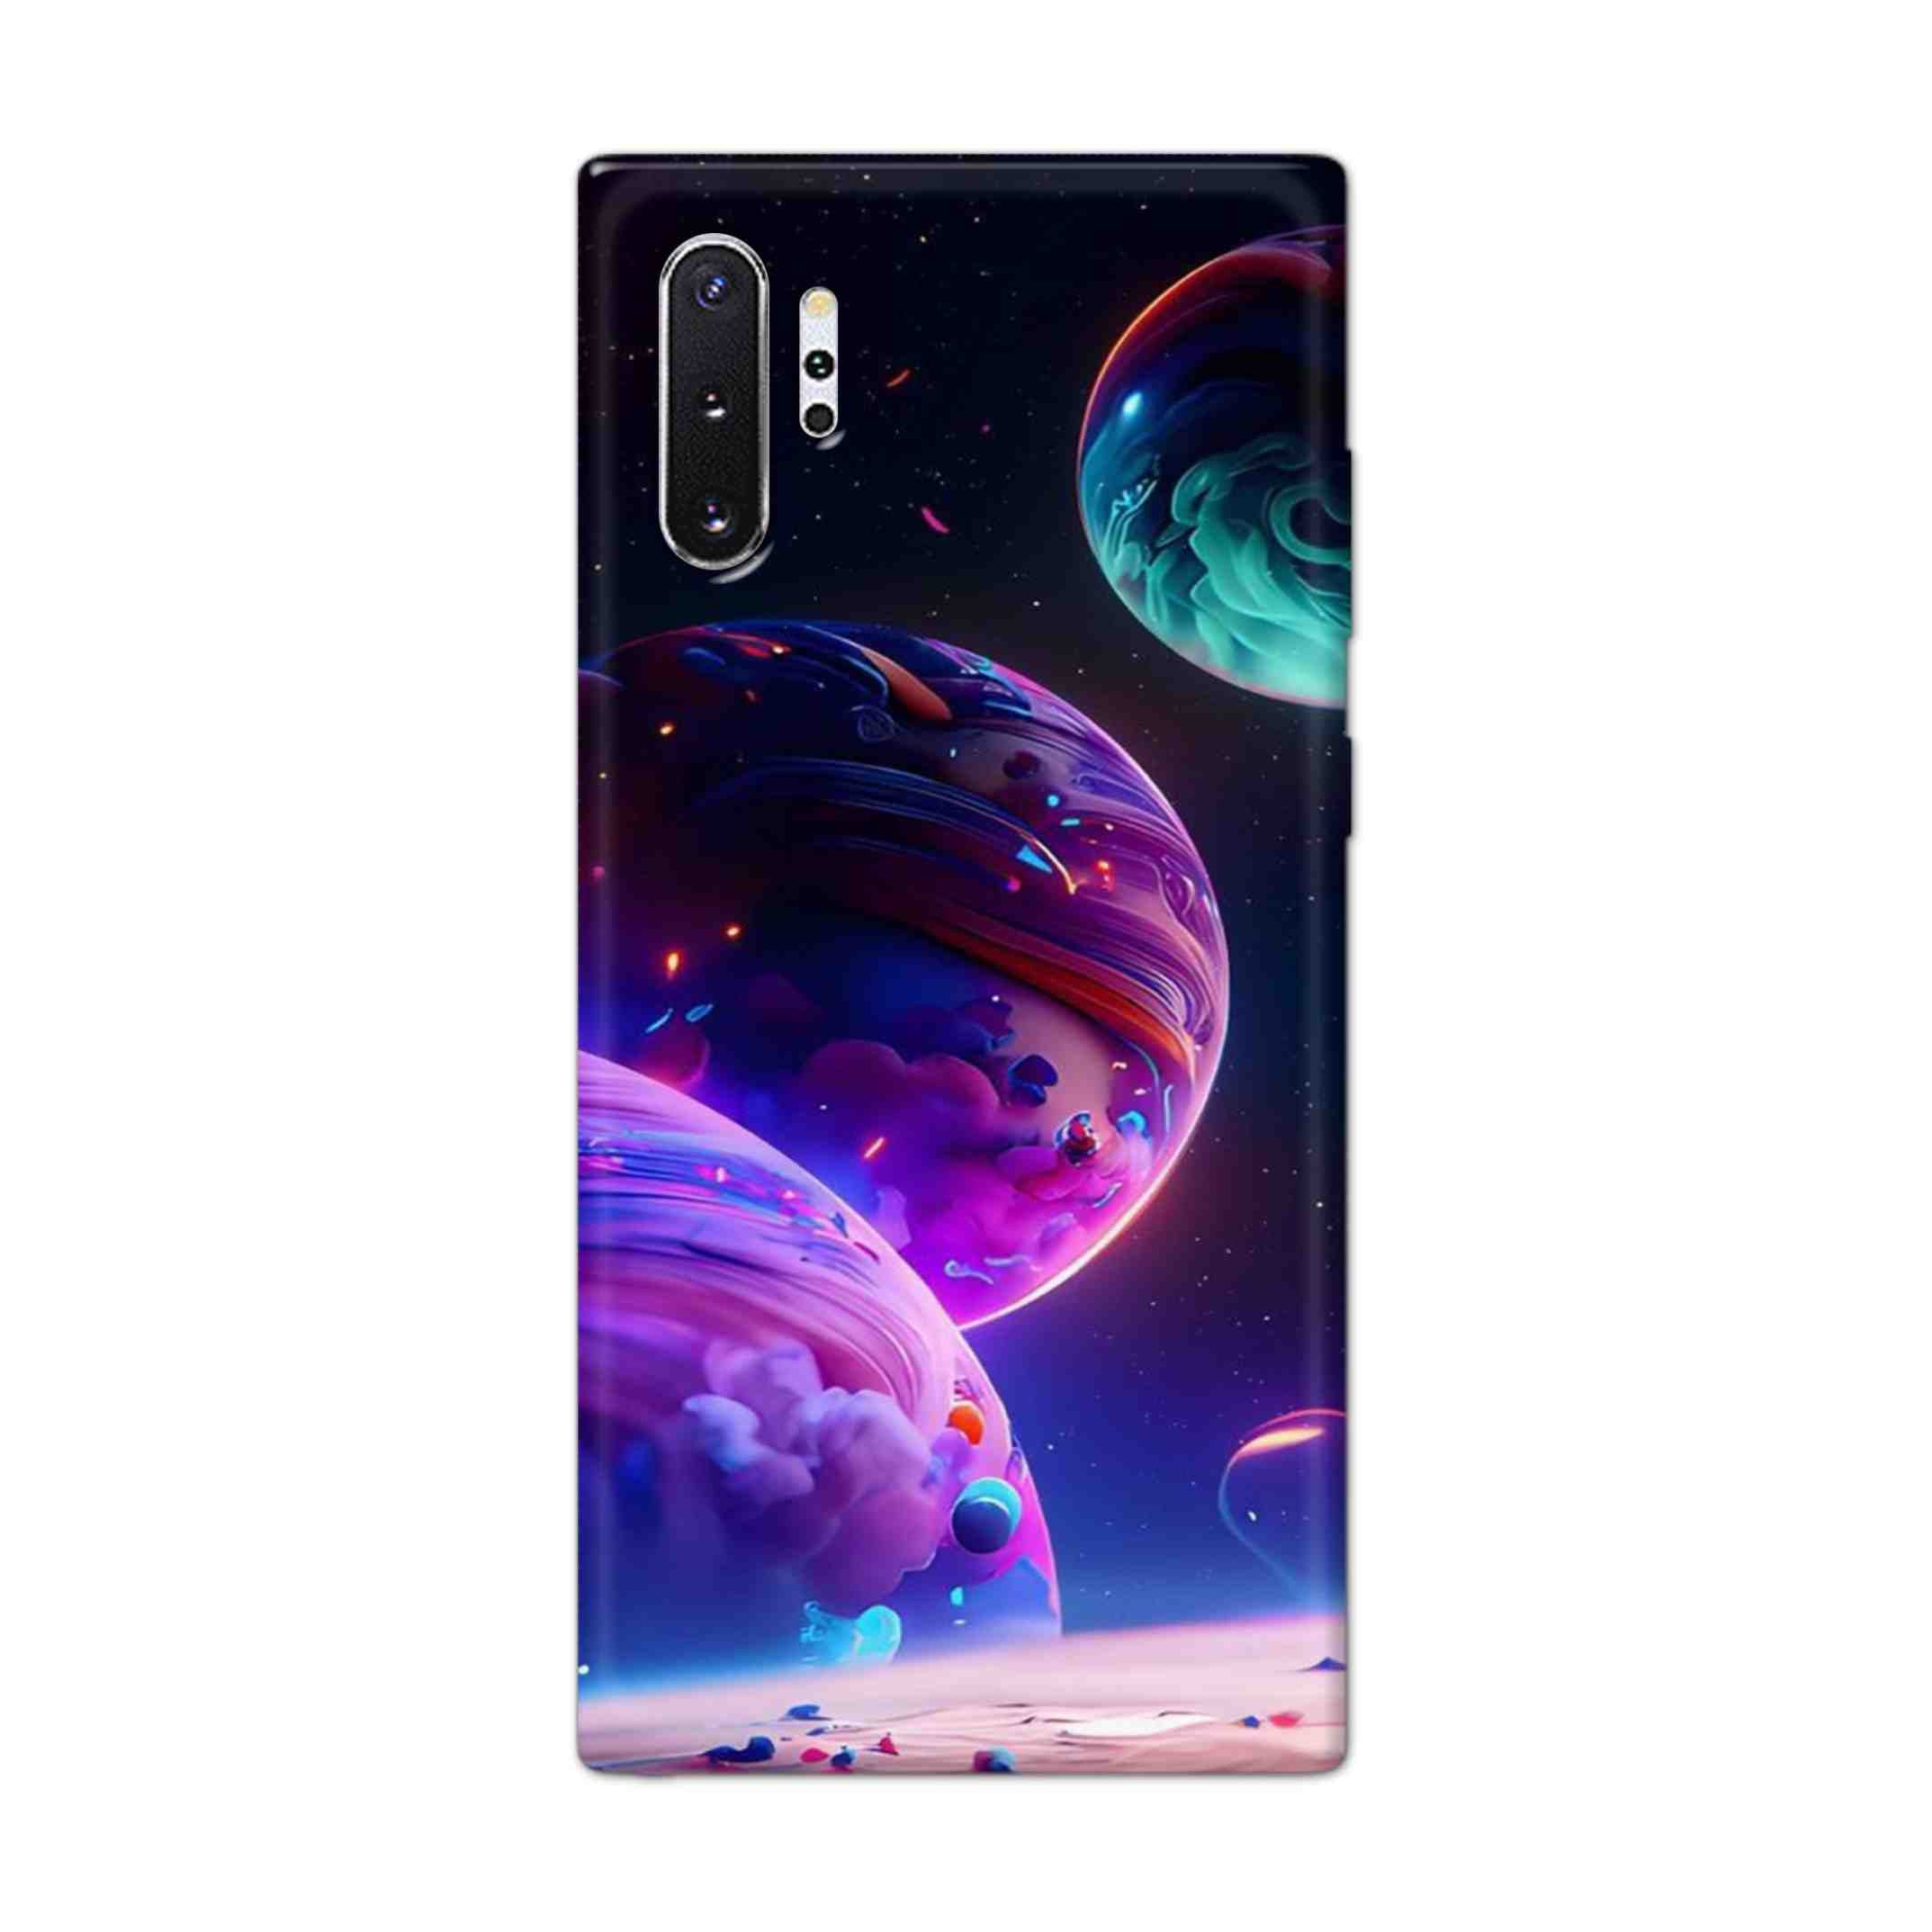 Buy 3 Earth Hard Back Mobile Phone Case Cover For Samsung Note 10 Plus (5G) Online